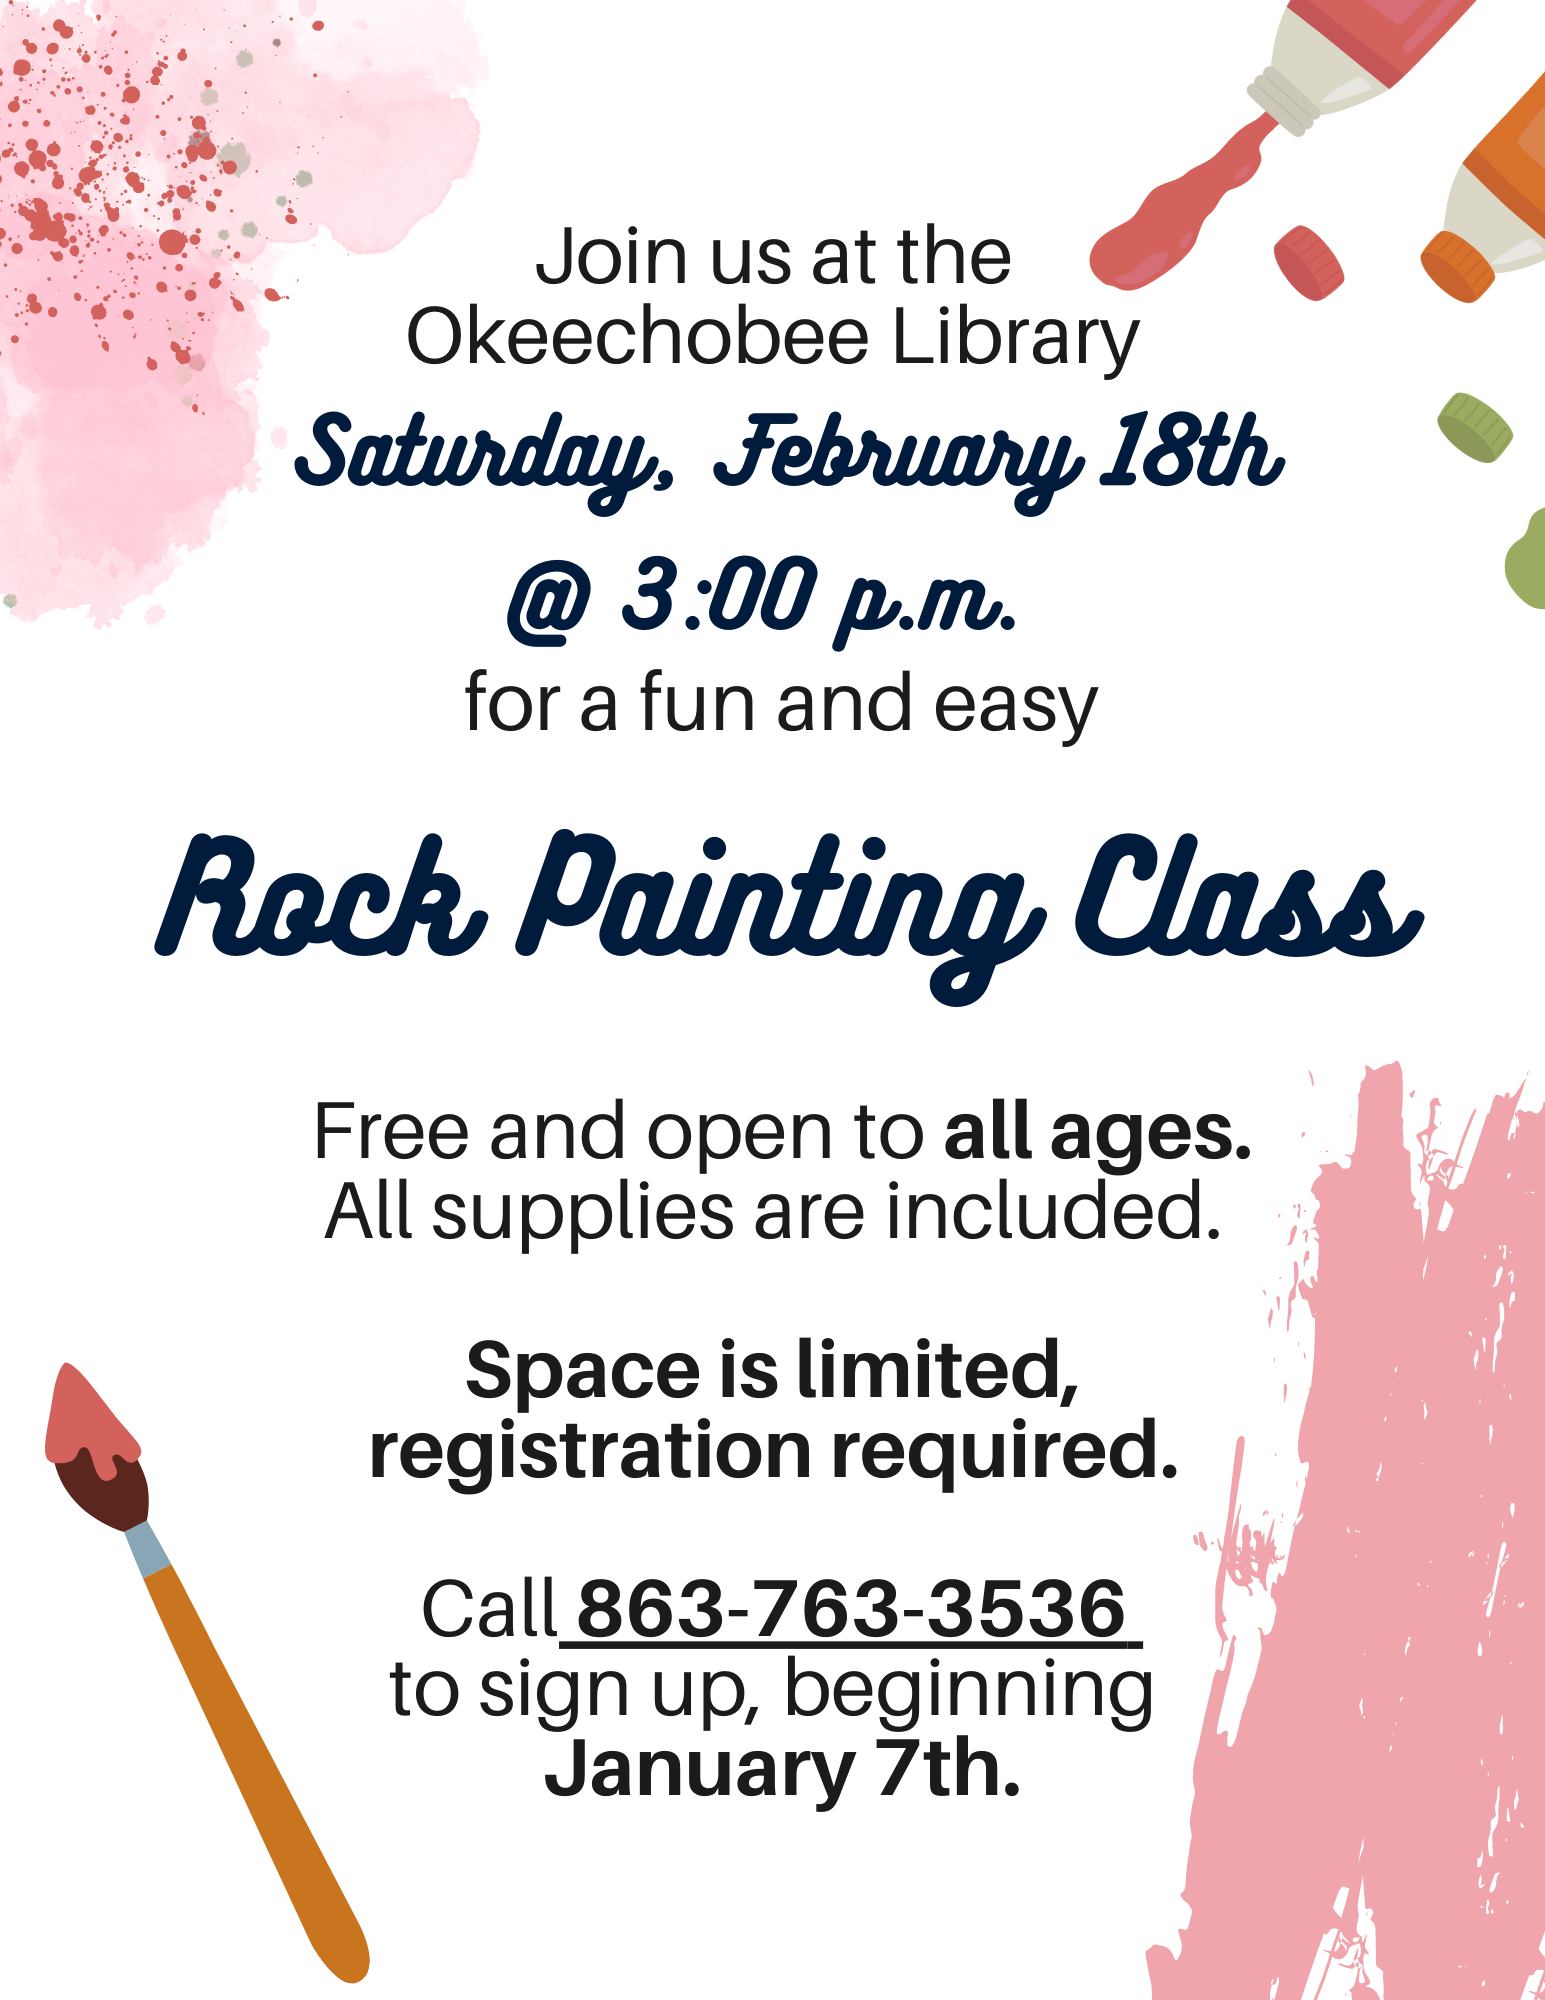 Join us Saturday, February 18th at 3pm for FREE! This event is open to all ages and all supplies are included.